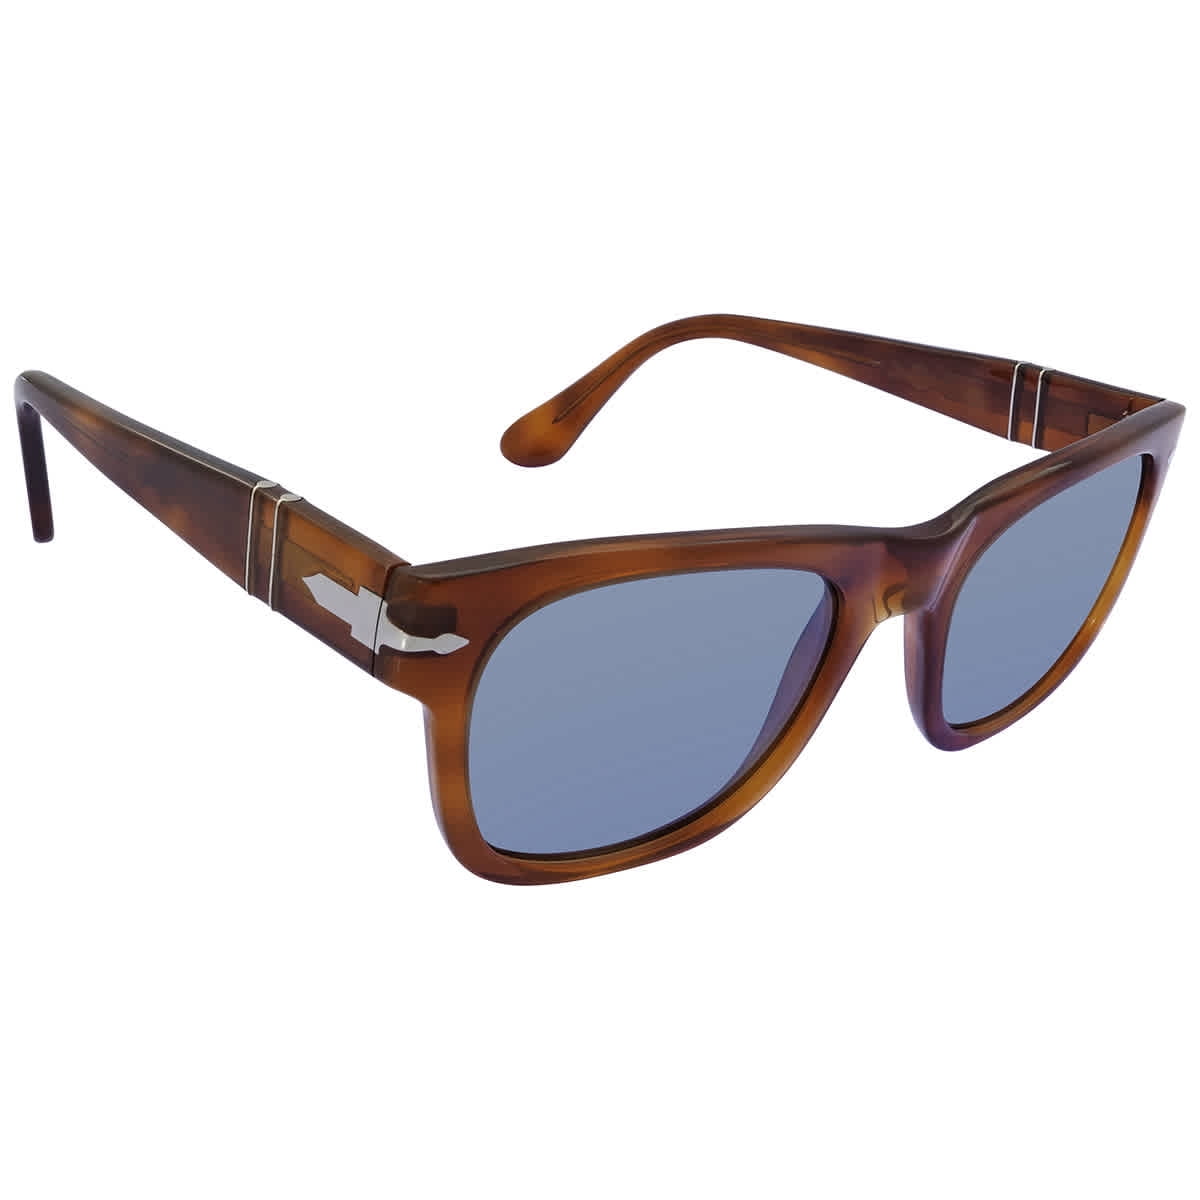 Persol Eyeglasses PO3263V 1172 - Best Price and Available as Prescription  Eyeglasses